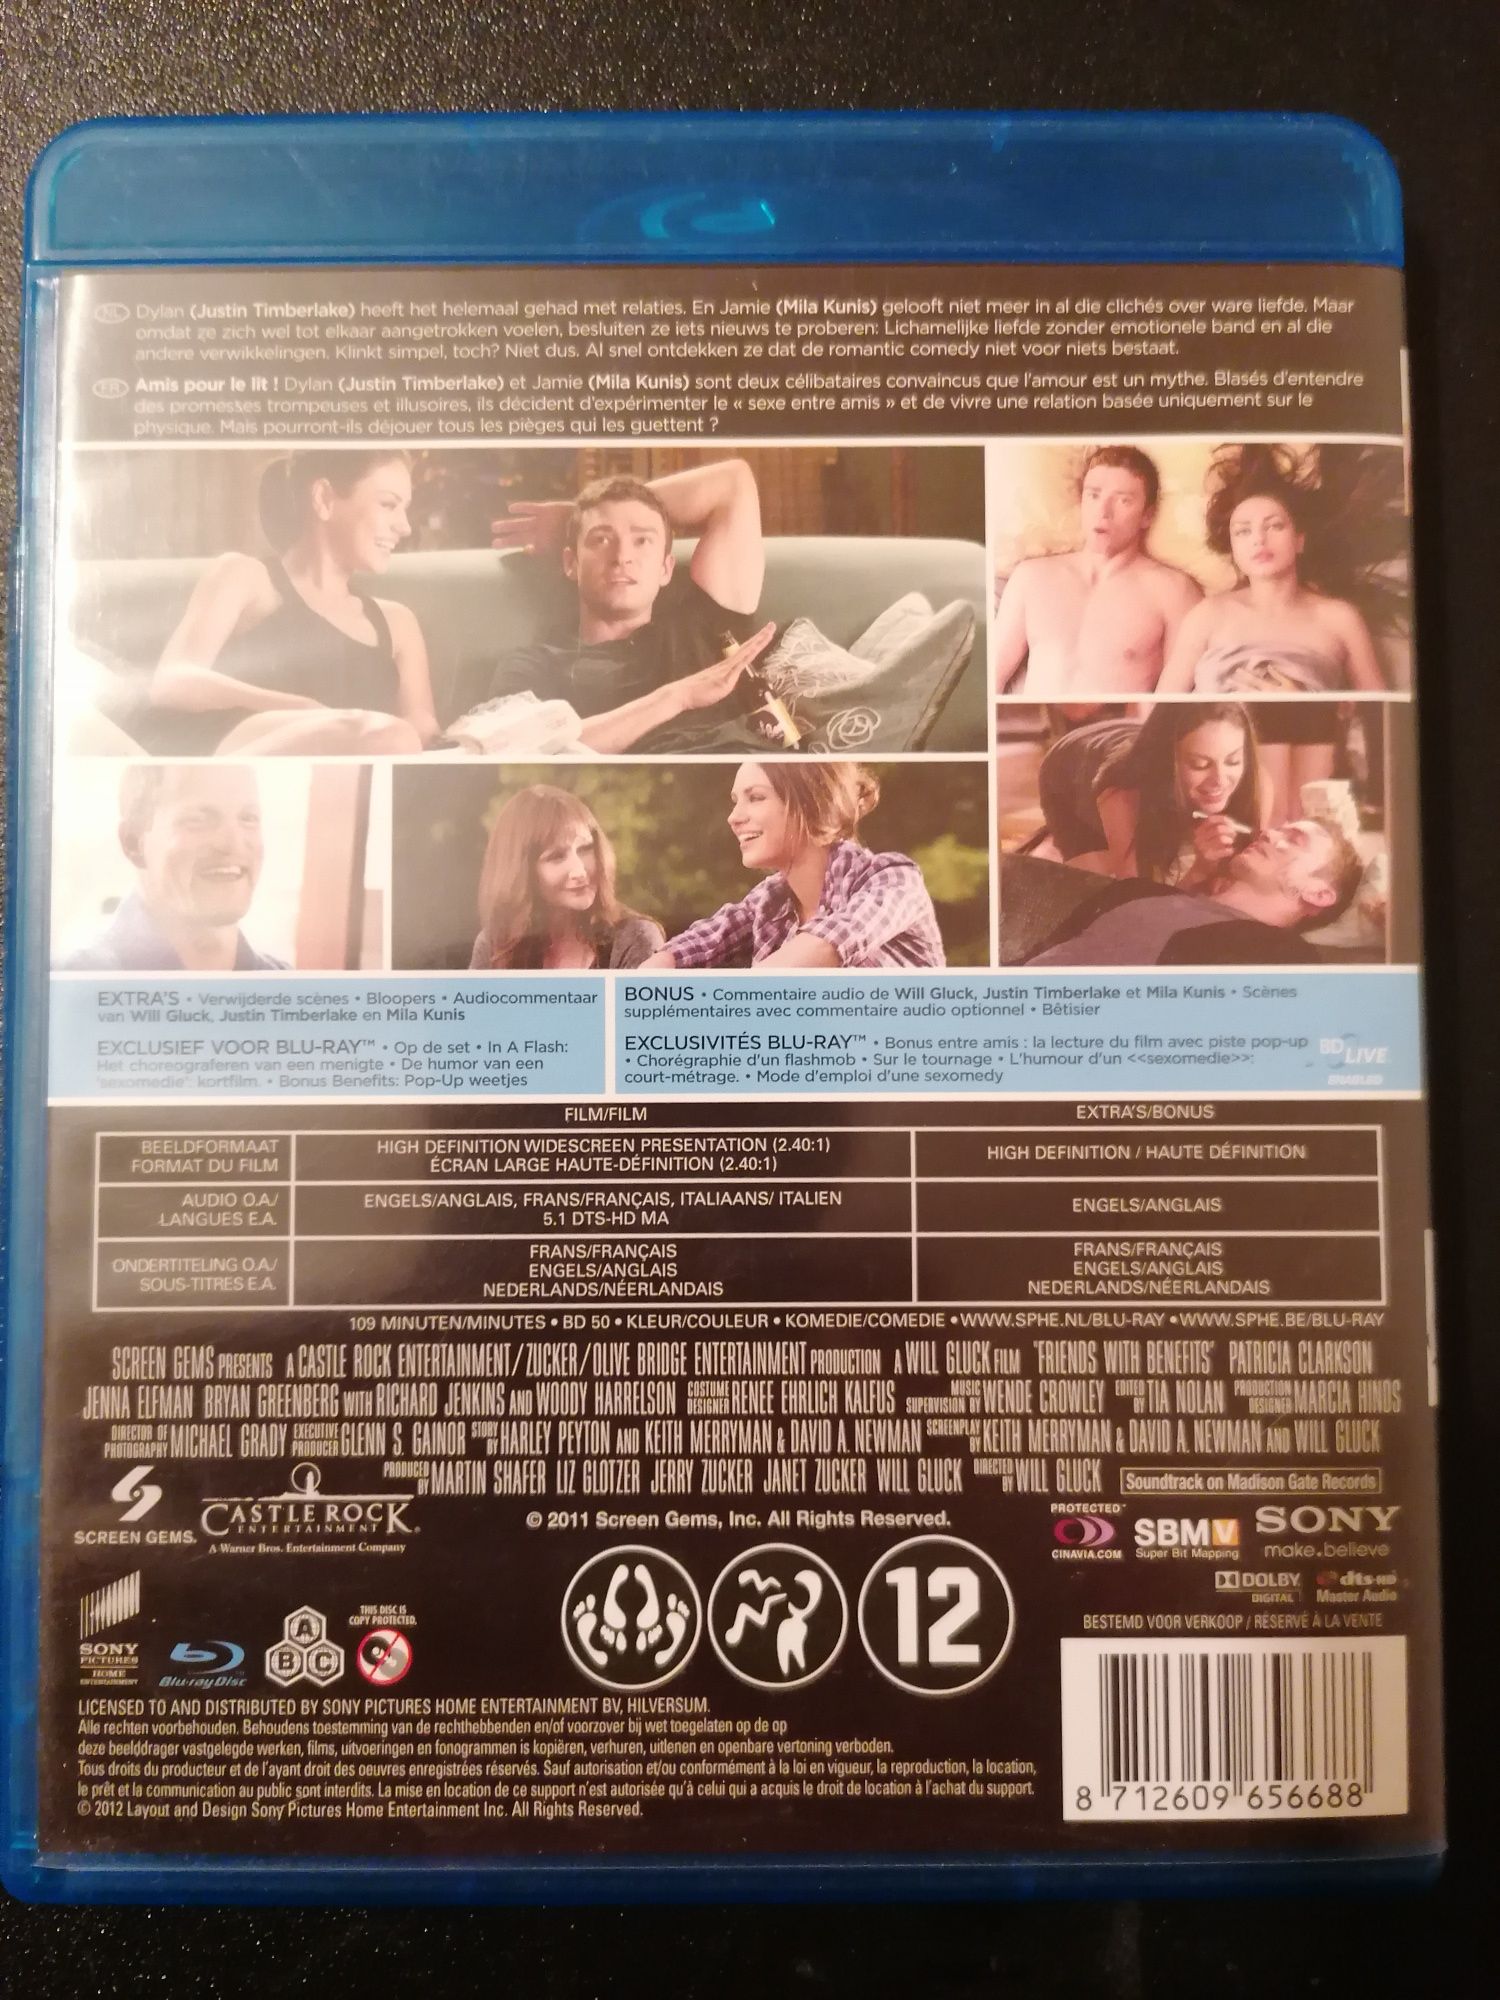 Friends with benefits - Blu ray